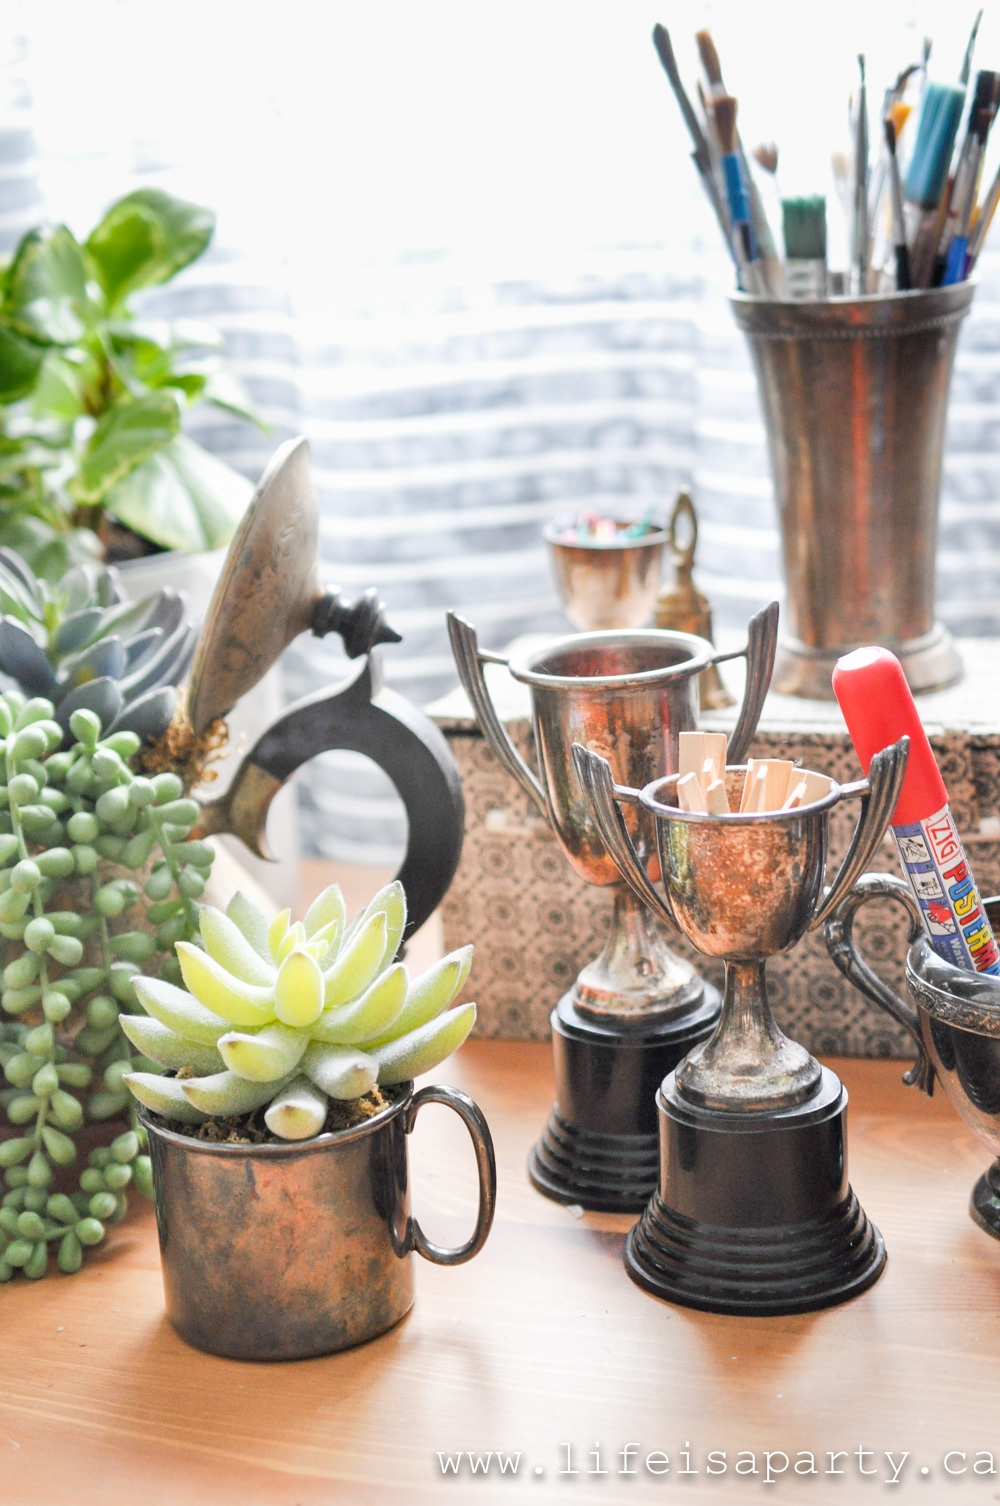 Desk Organization: get your office and craft room organized with unlikely and beautiful containers of silver, wood, and metal from the thrift store.